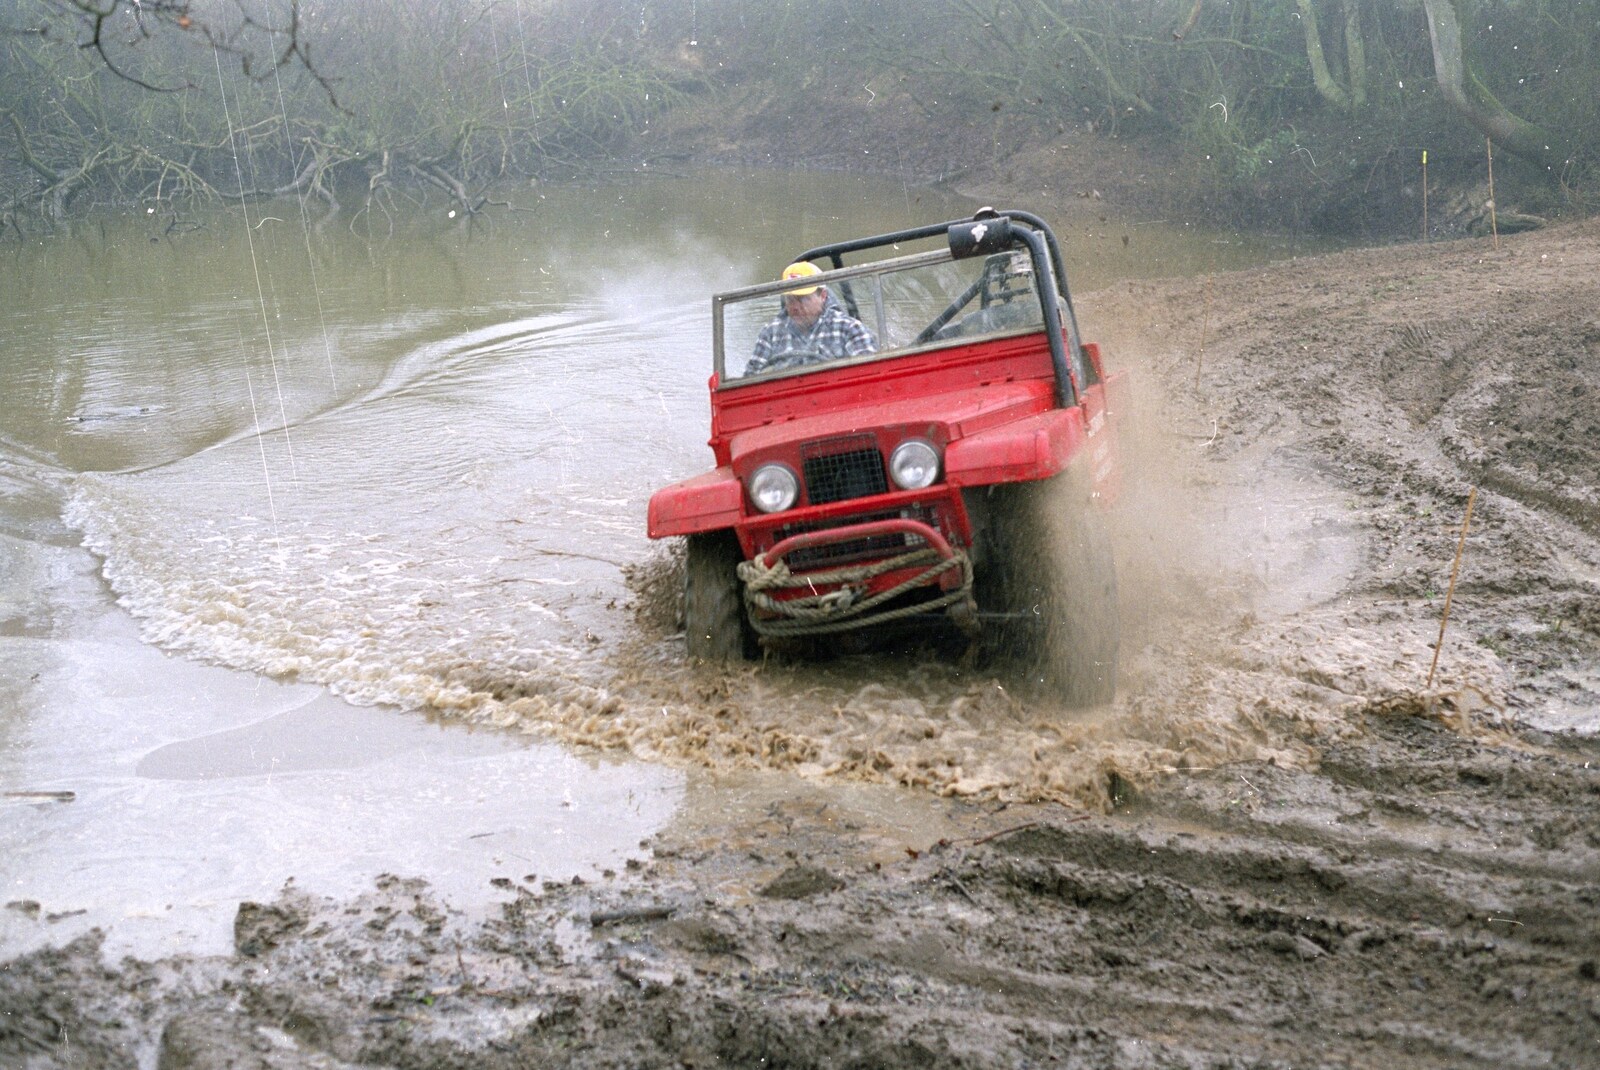 A bit of serious off-roading in a muddy pond from Printec at the Park Hotel, Diss, Norfolk - 14th January 1992